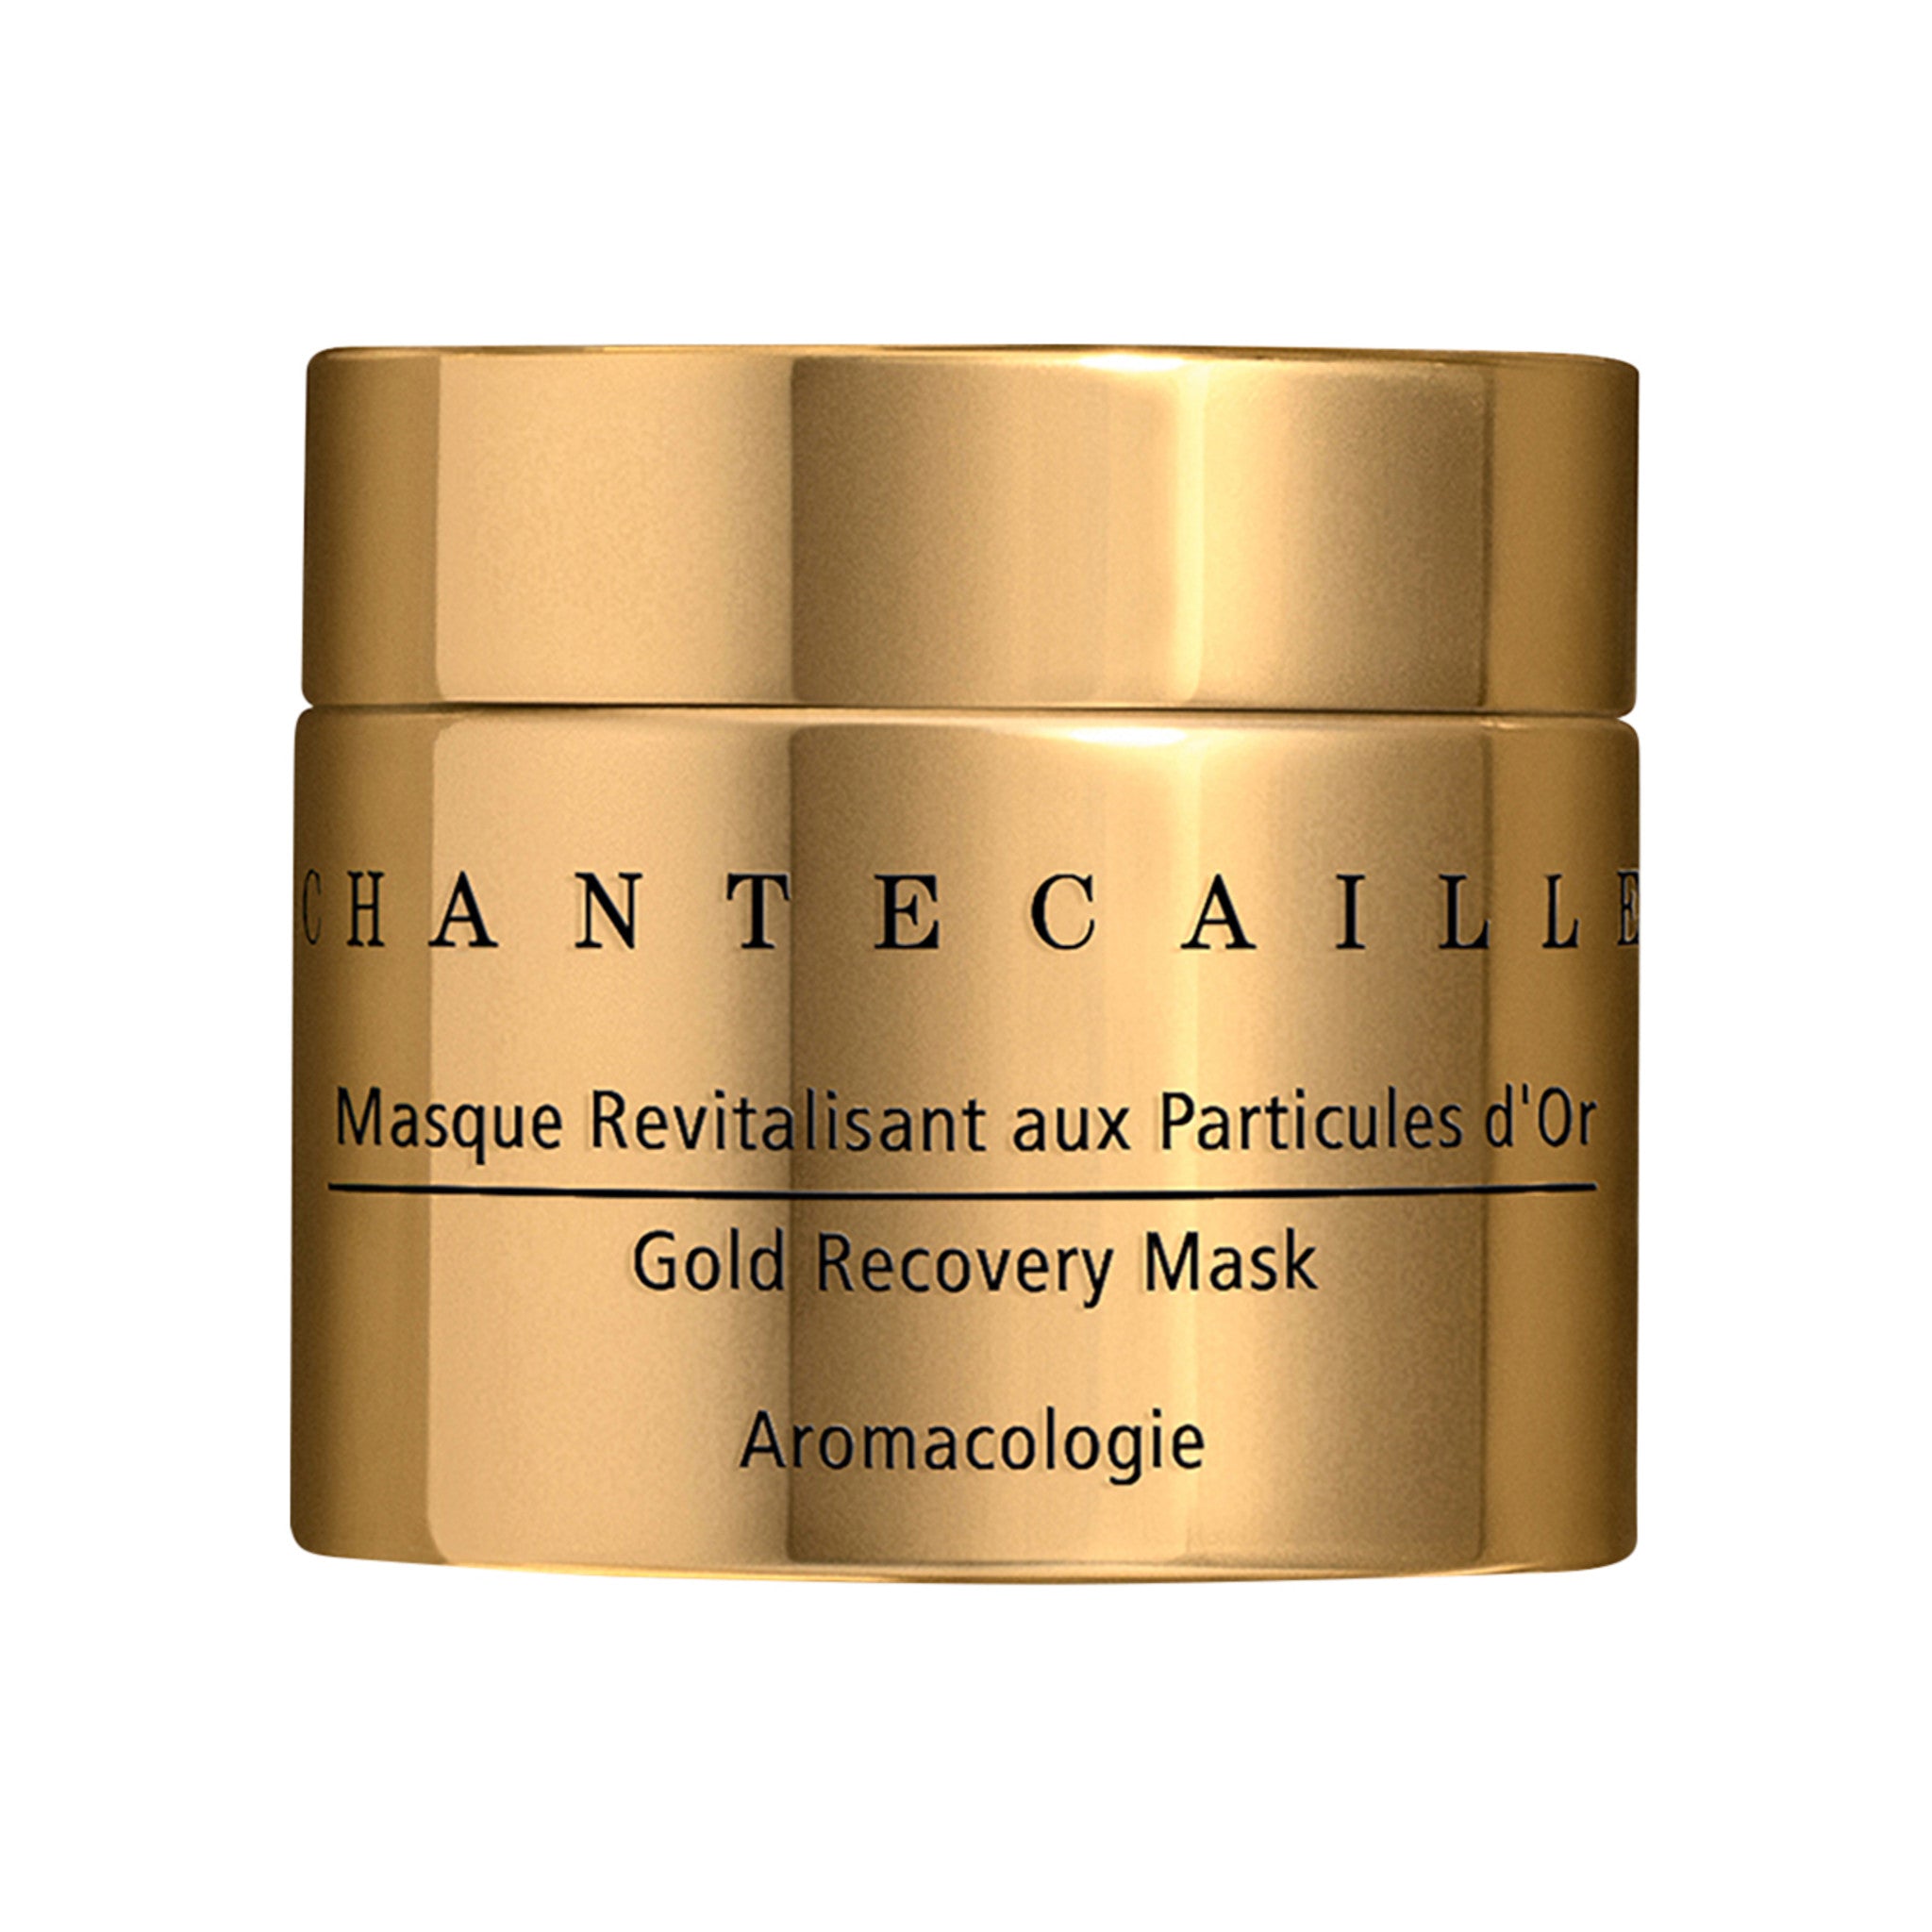 Gold Recovery Mask main image.